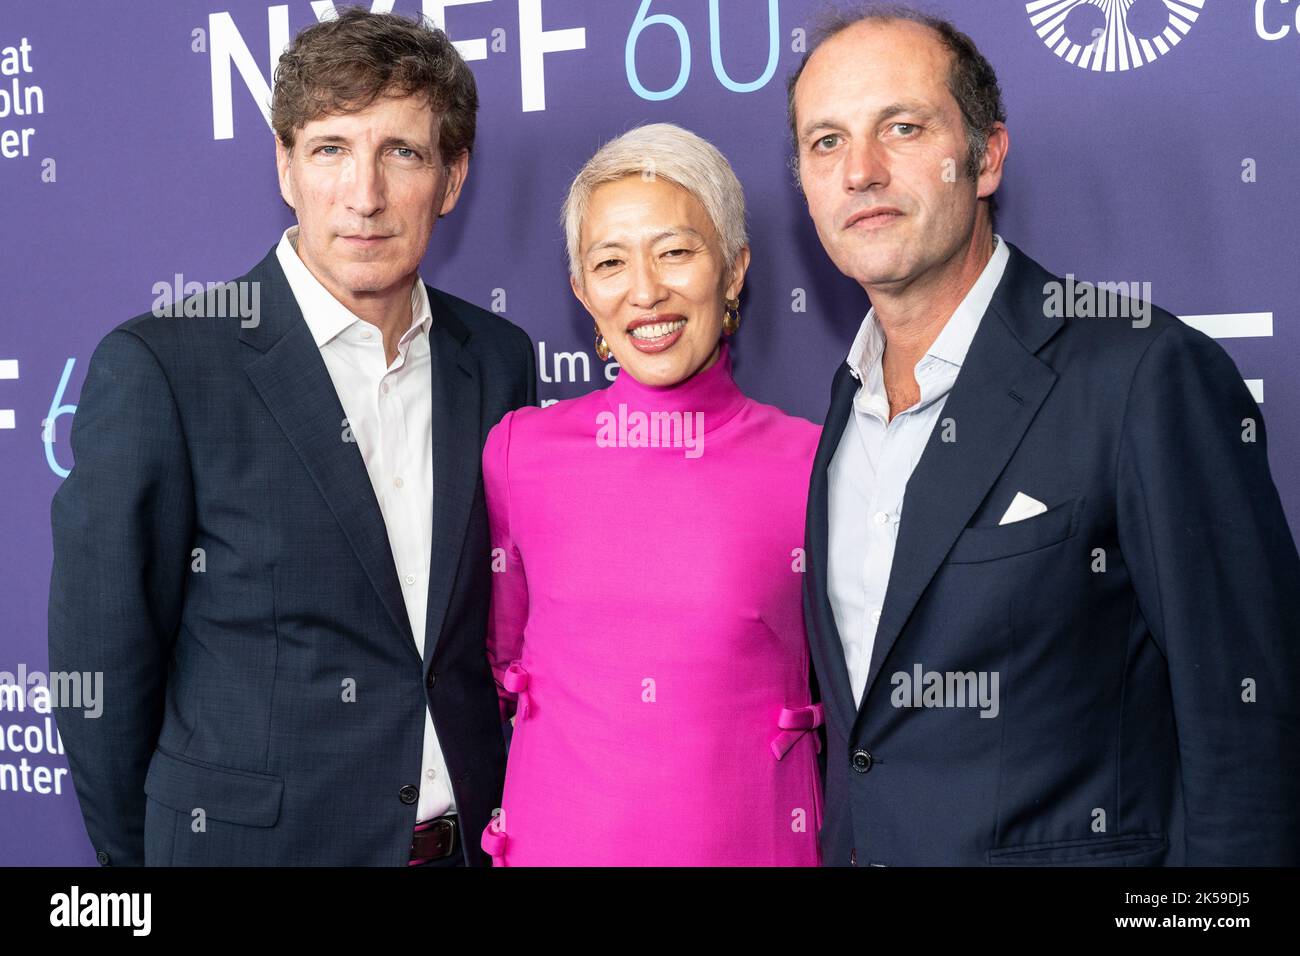 New York, NY - October 6, 2022: Peter Spears, Teresa Park, Francesco Melzi d'Eril attend Bones And All premiere during 60th New York Film Festival at Alice Tully Hall Stock Photo